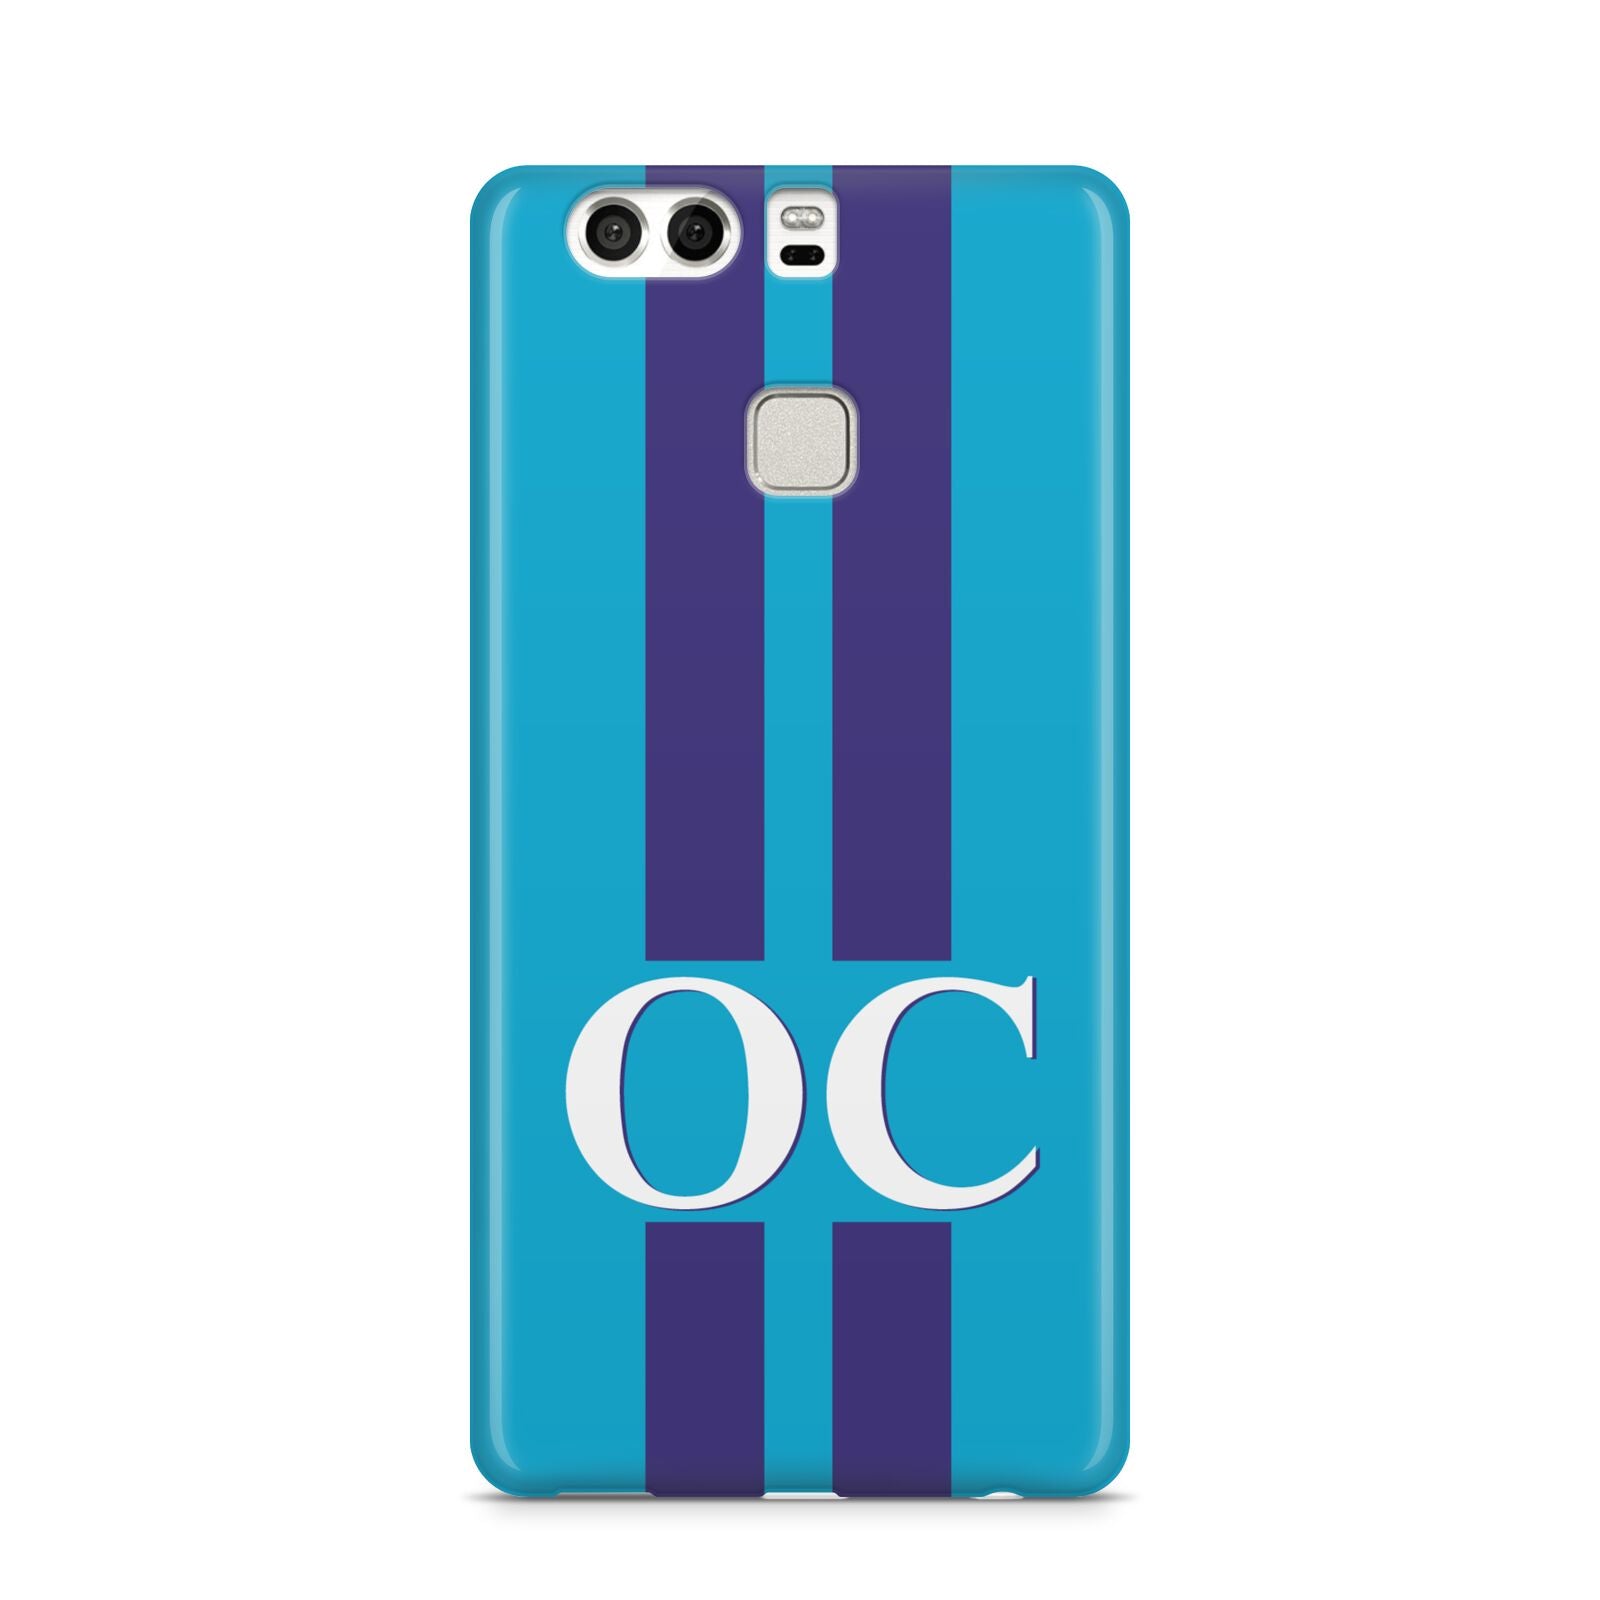 Turquoise Personalised Huawei P9 Case